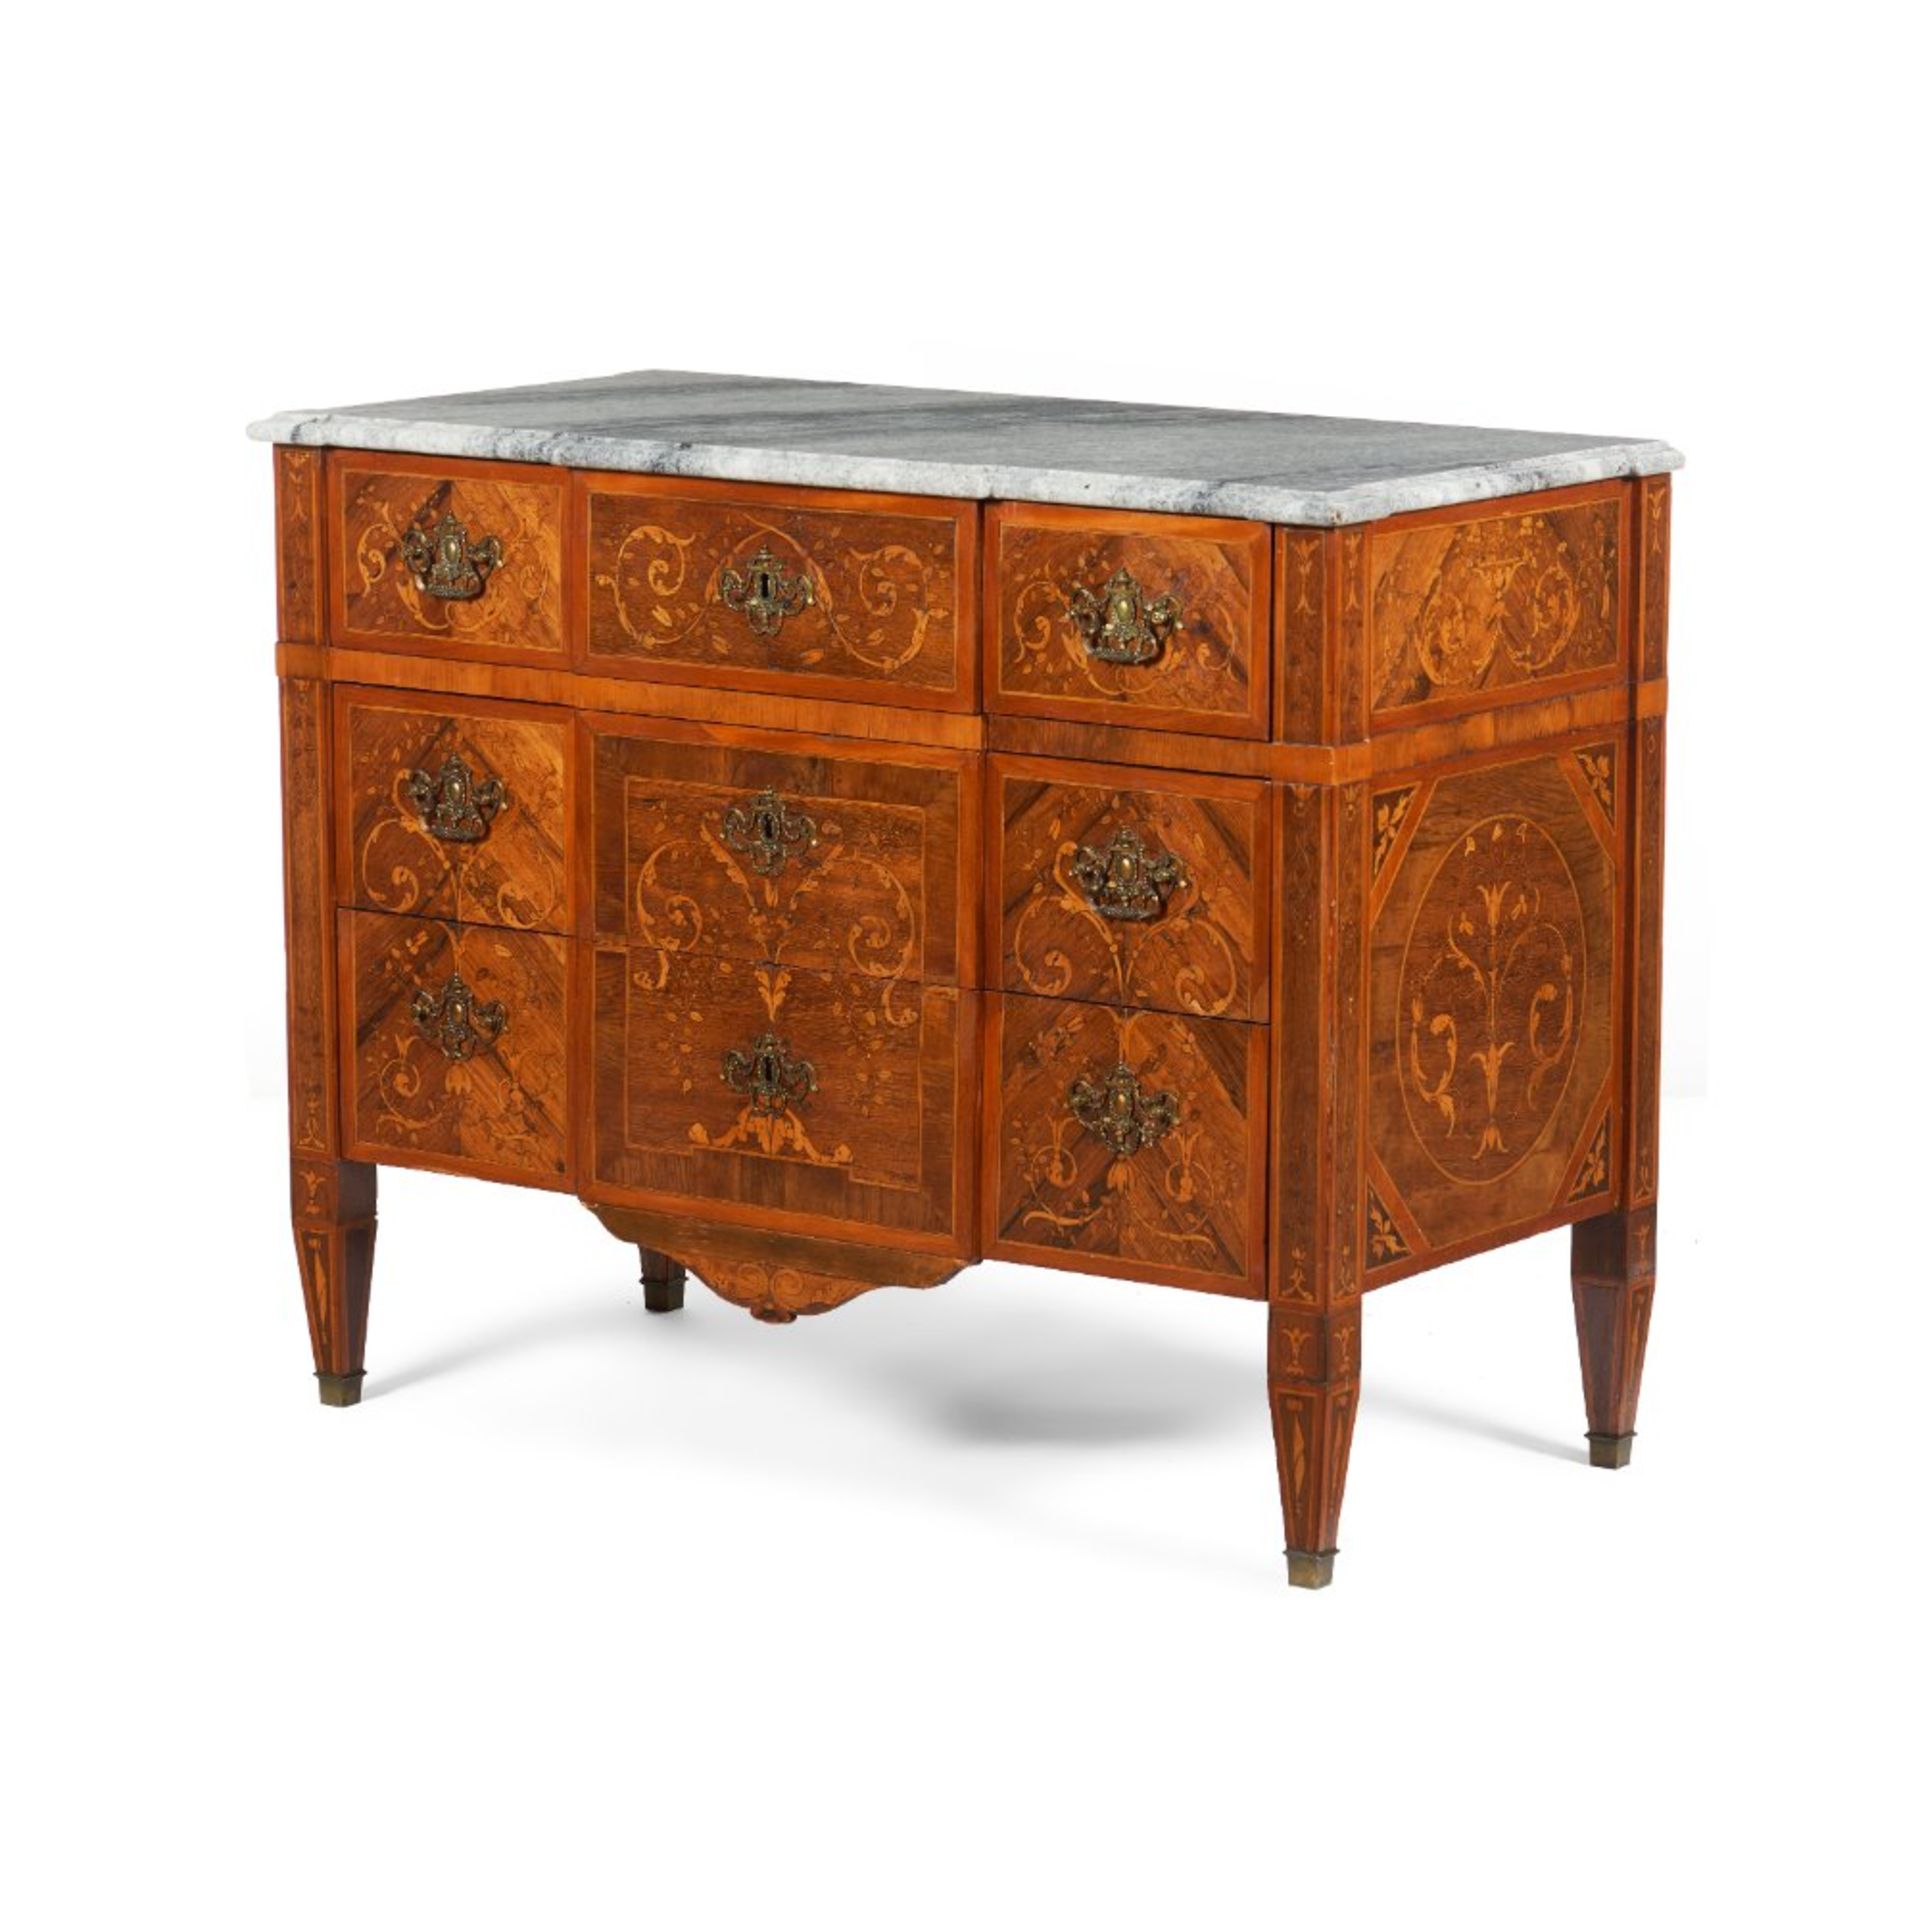 A D. Maria chest of drawers